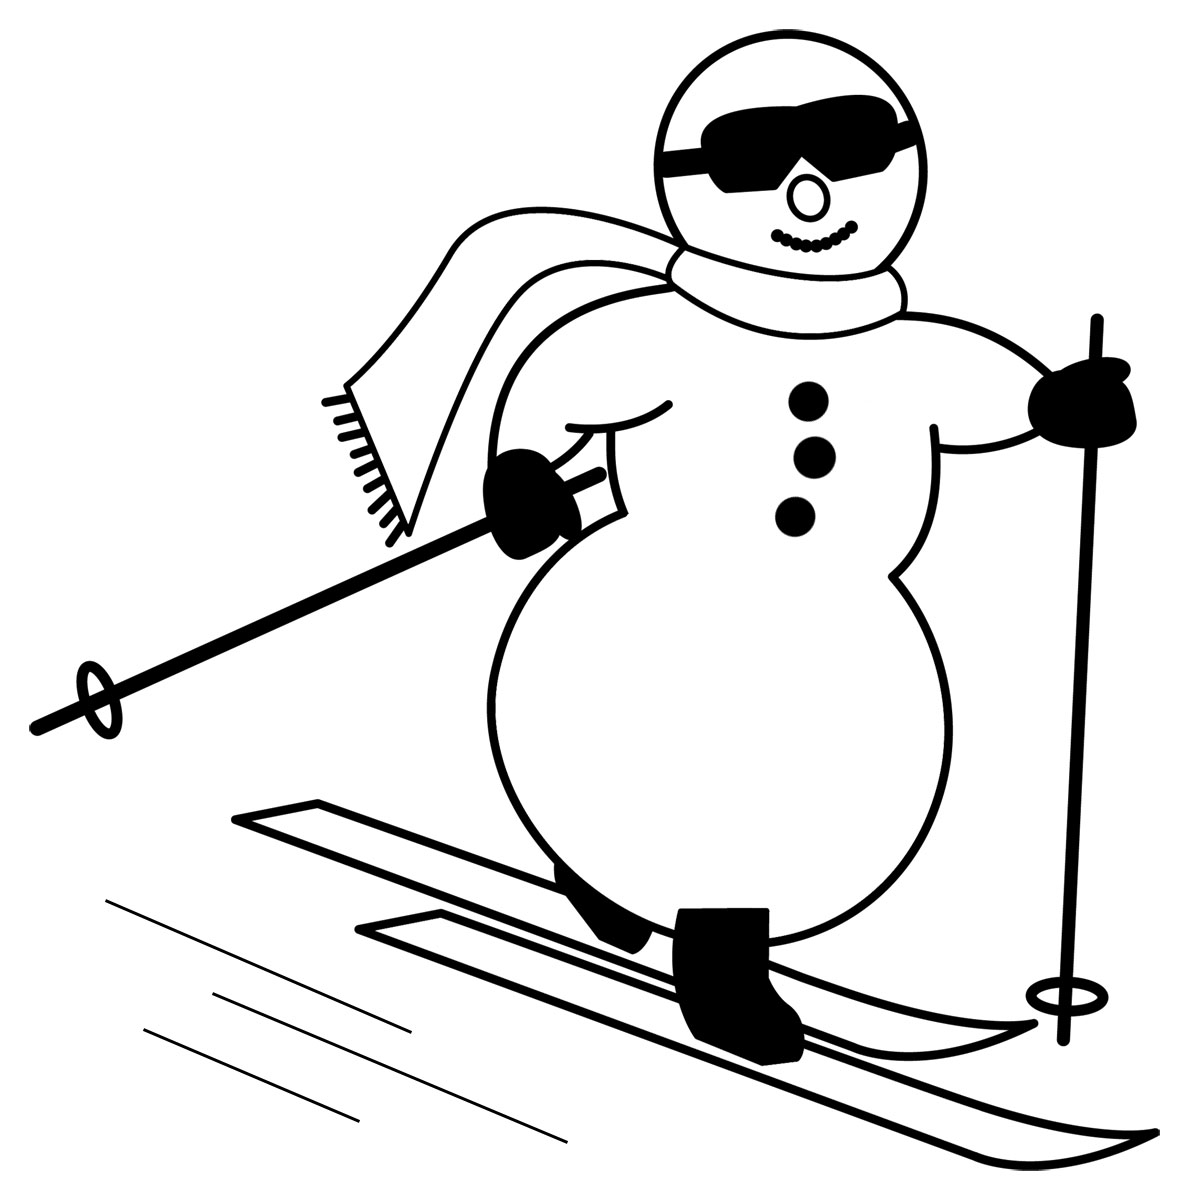 Snowman Cross Country Skiing Clip Art In Black And White  A Cartoon